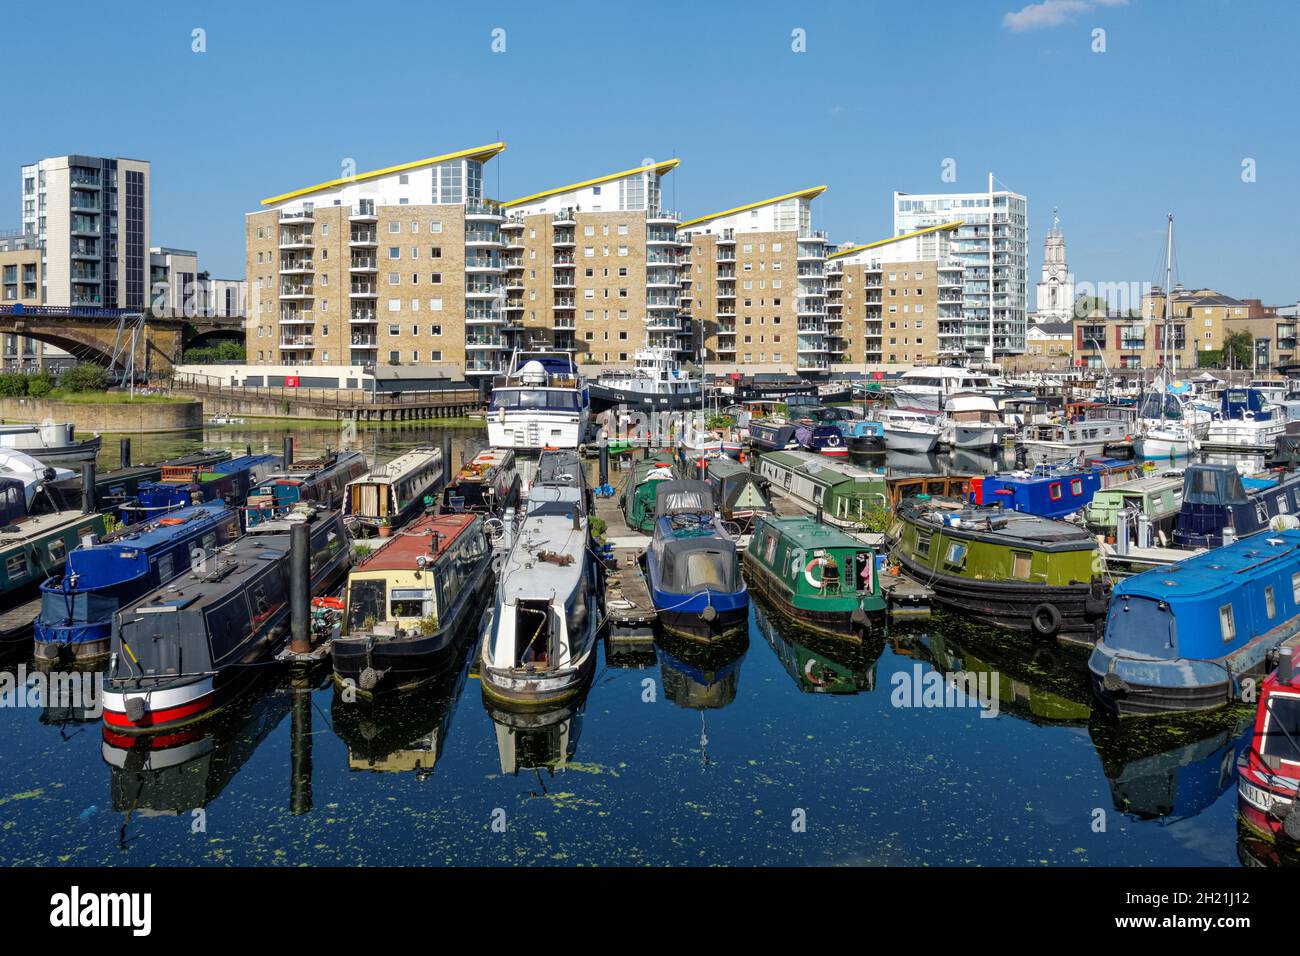 Houseboats at Limehouse Basin with Marina Heights, modern residential buildings in the background, London, England United Kingdom UK Stock Photo